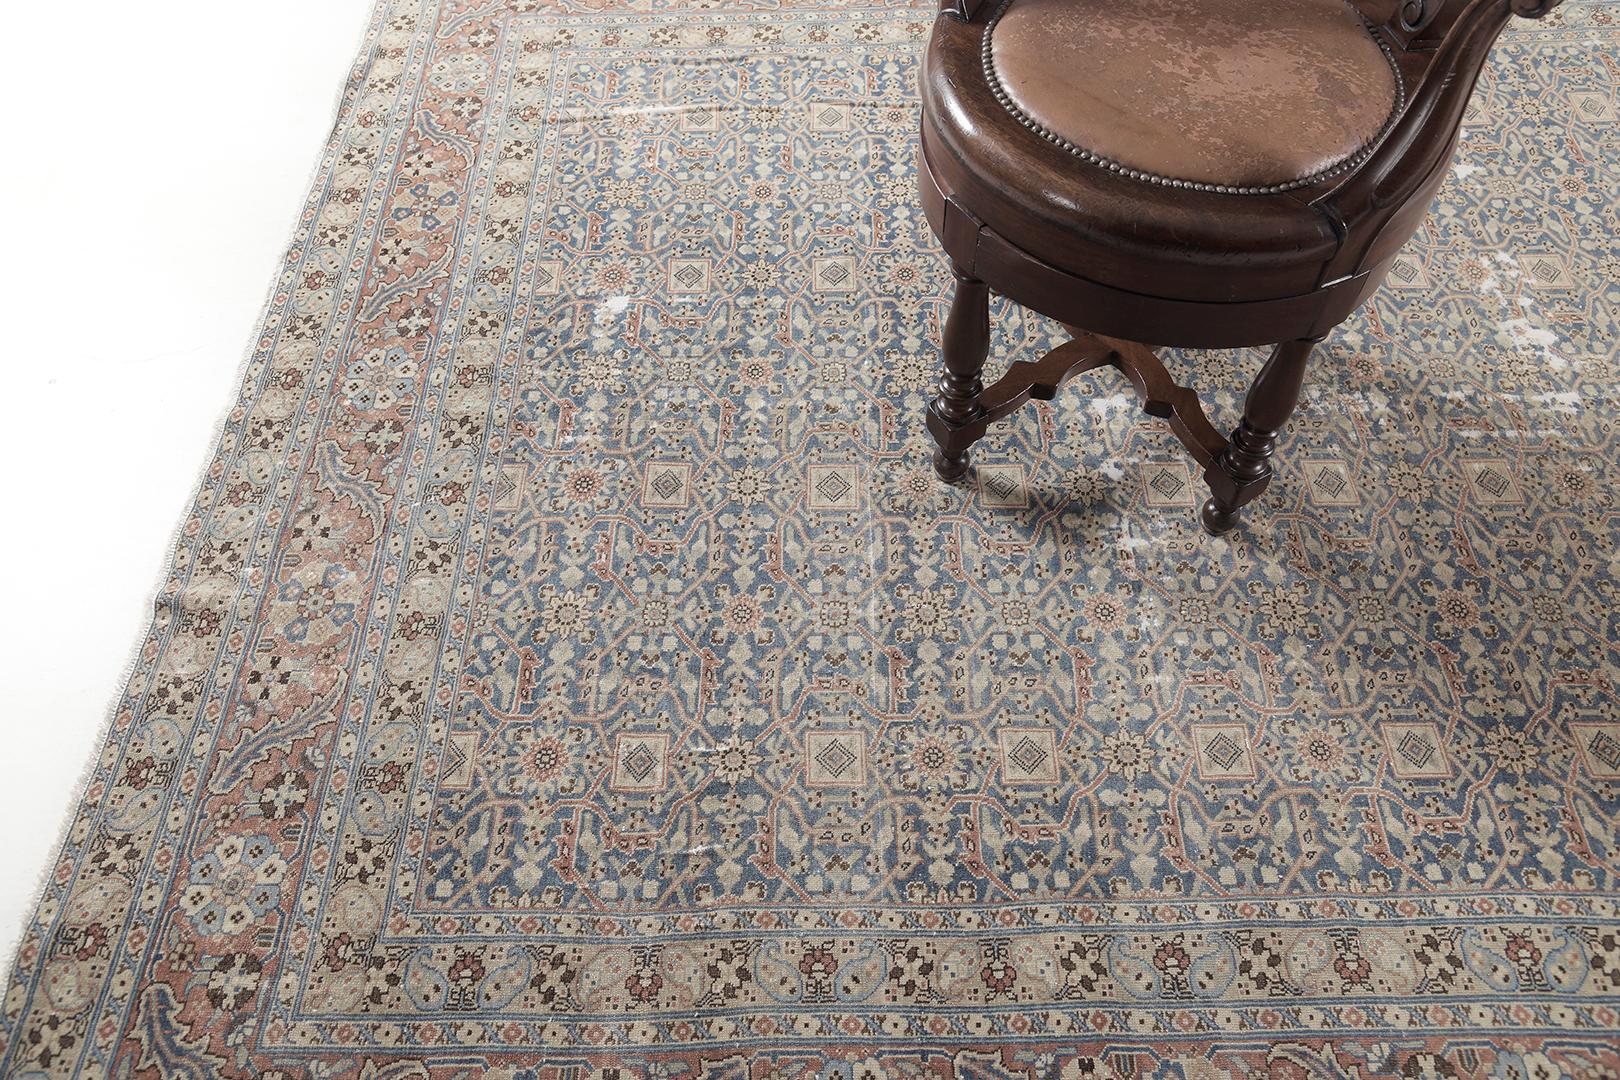 This timeless Tabriz Seneh Rug features a stunning pattern in a midnight blue field. From all the shades of a neutral tone, the scrolling vinery issuing split leaves is delicately woven around the rug and makes the borders well-complemented. A home